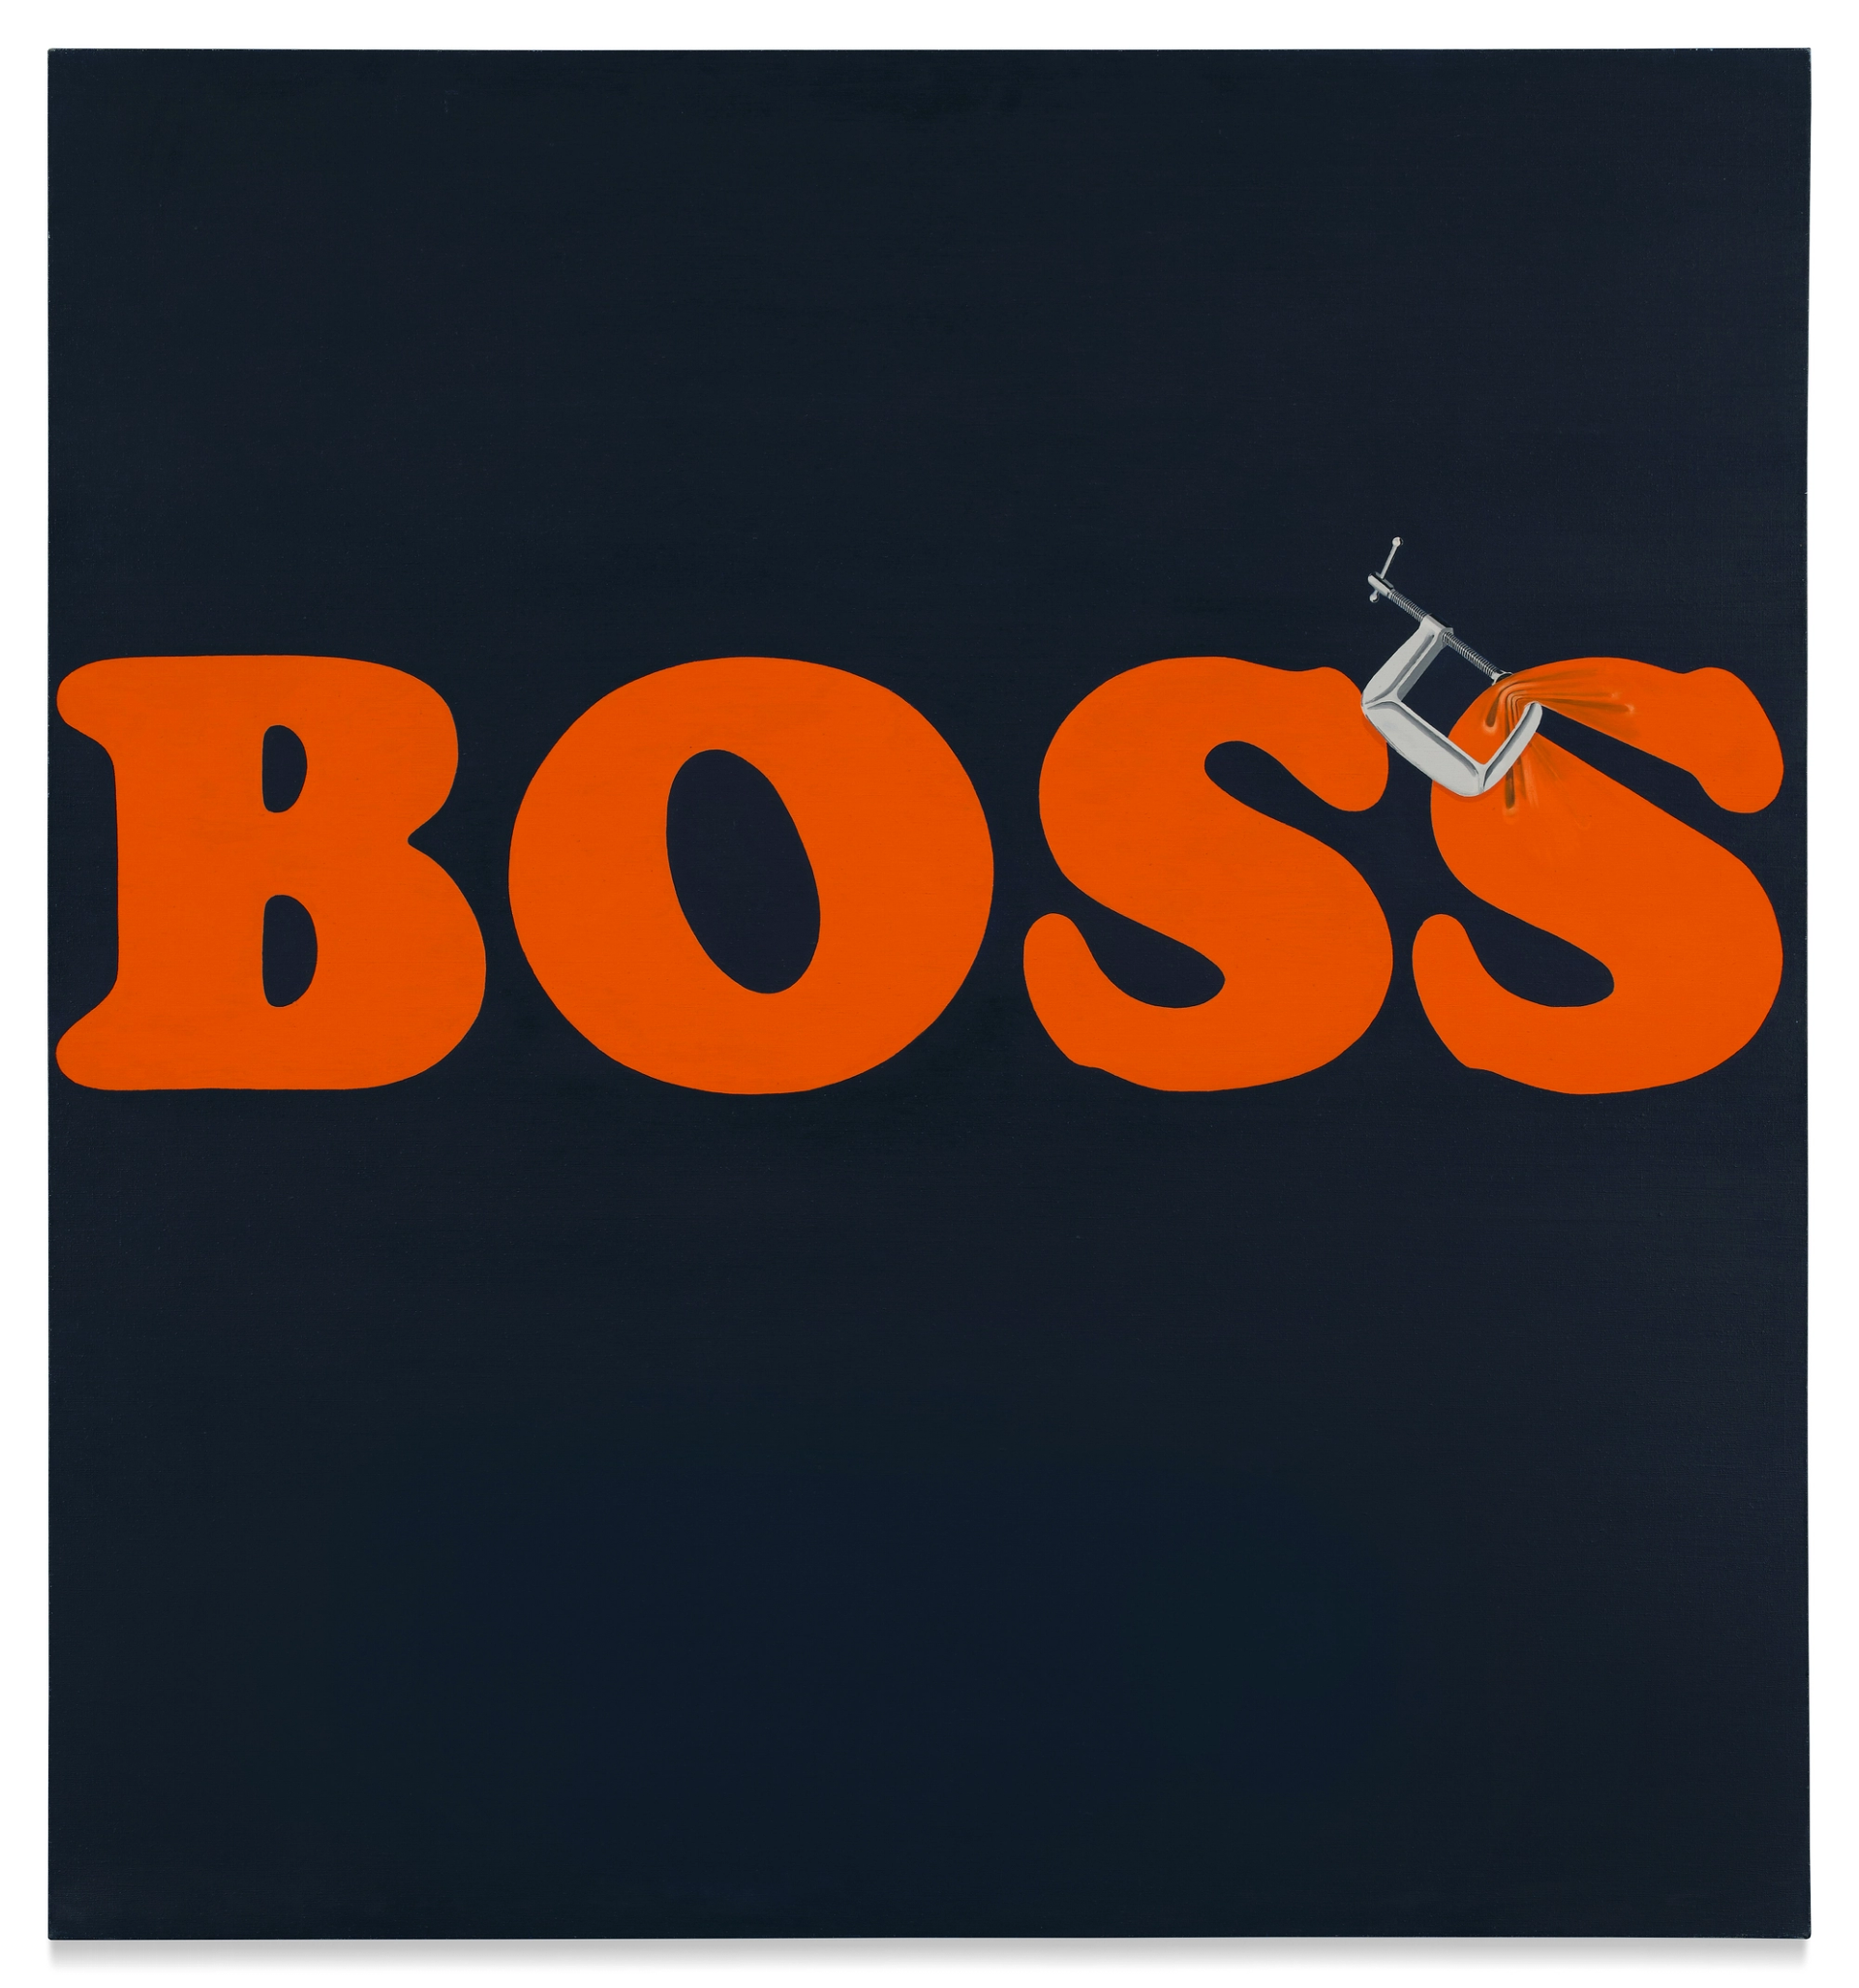 An image of a work by Ed Ruscha, that shows the word BOSS in all orange capitals against a dark blue background. A graphic-looking industrial C-clamp pinches the final S.